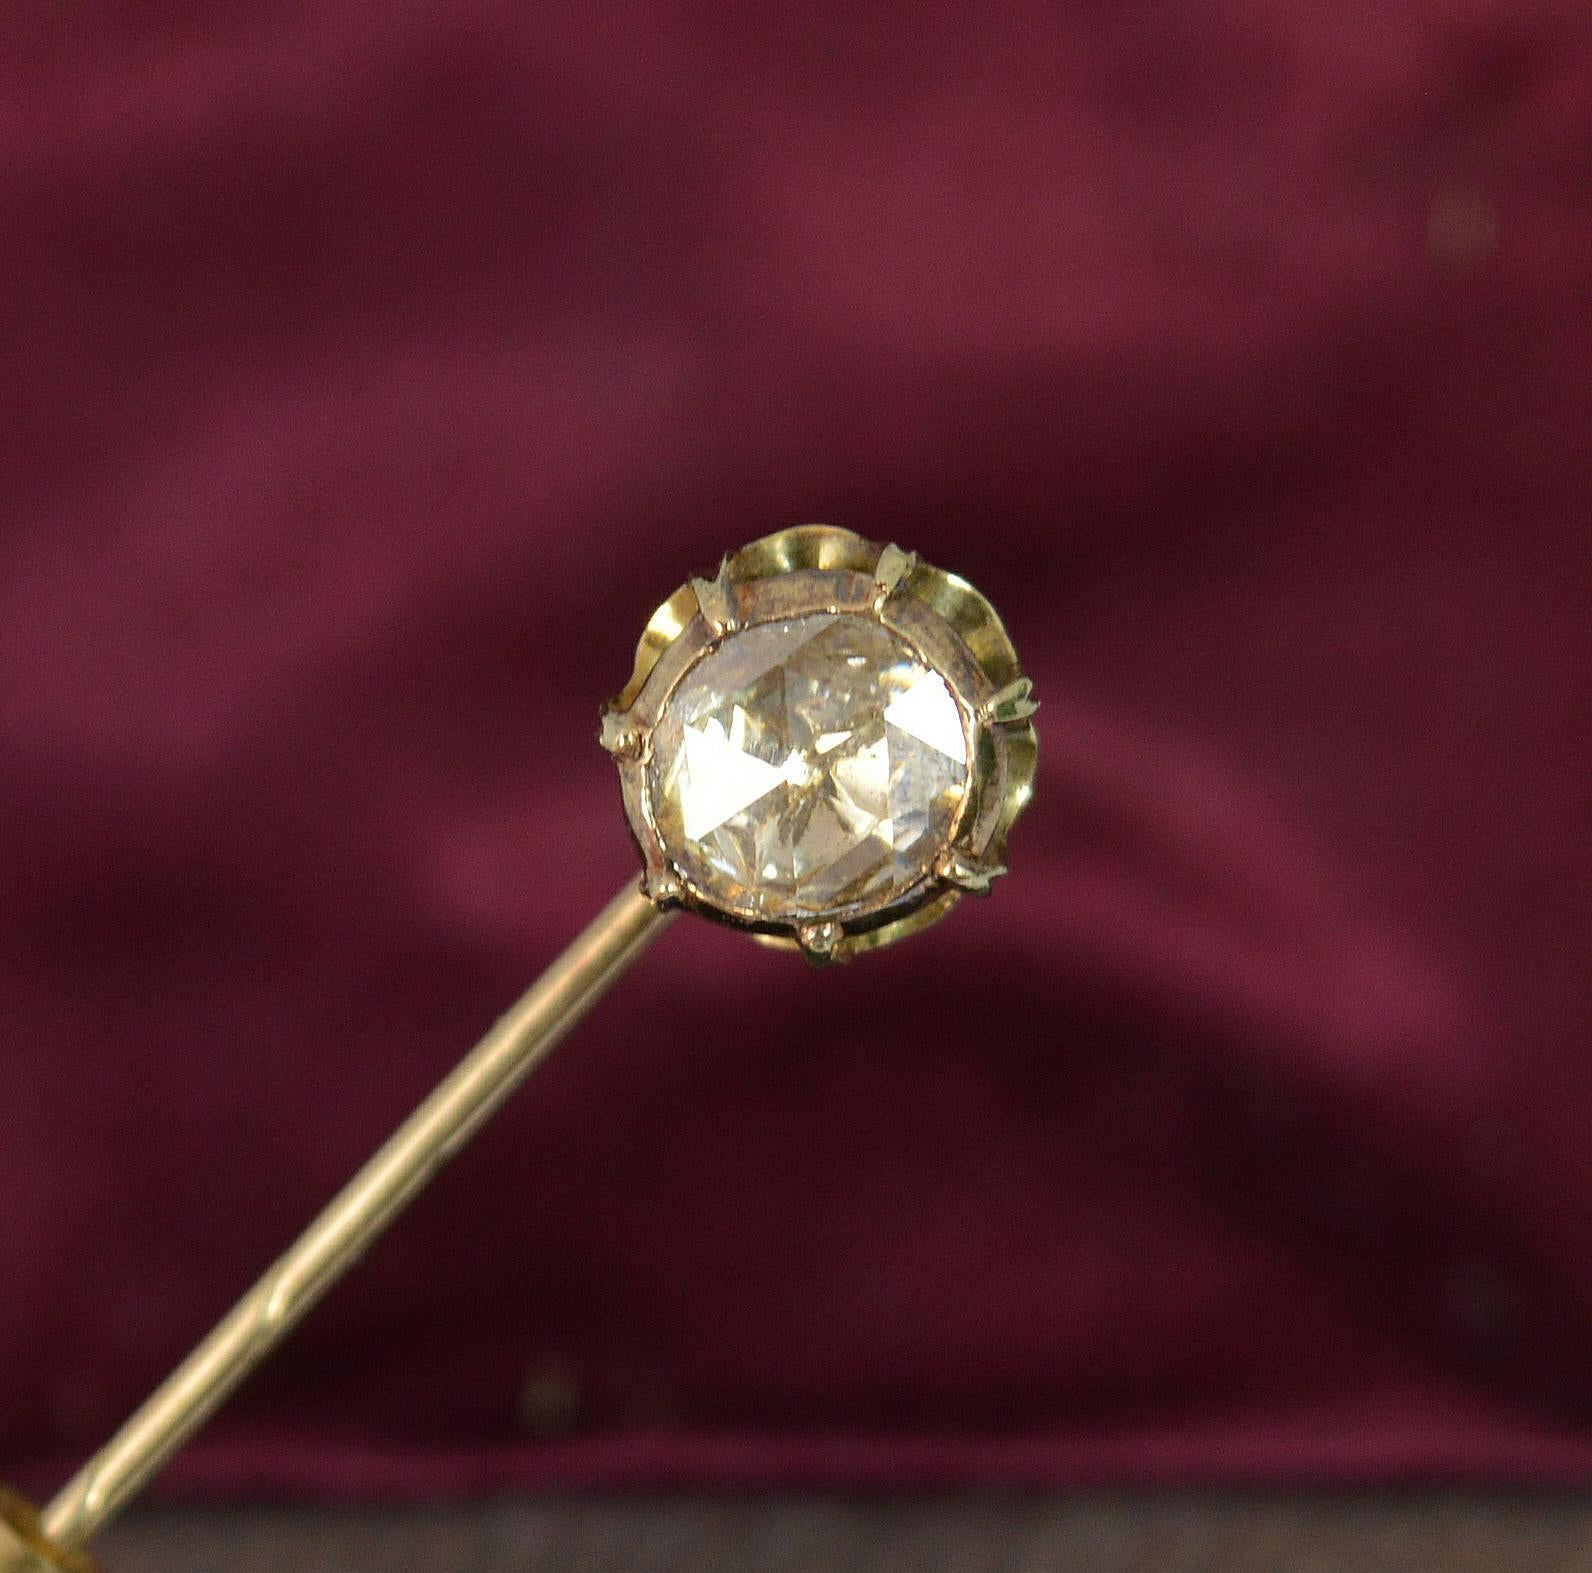 A rare Georgian period stick tie pin.
Modelled in solid gold with a closed foil back setting too.
Designed with a single natural rose cut diamond, 6.3mm diameter stone, spread of approx 1 carat.
Circa 1820.

CONDITION ; Very good for age. Securely